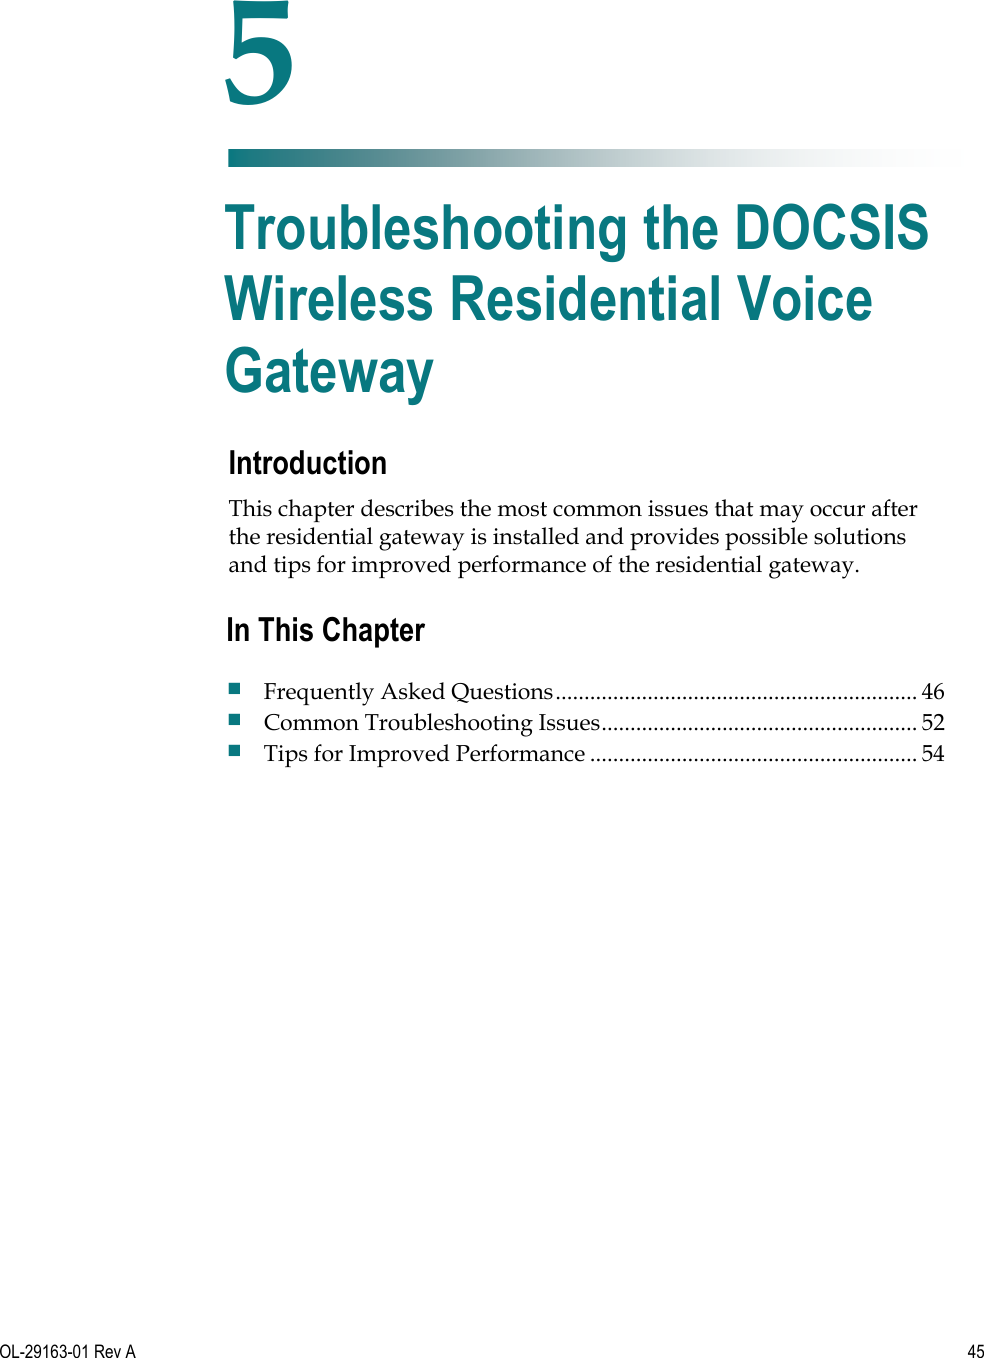   OL-29163-01 Rev A  45  Introduction This chapter describes the most common issues that may occur after the residential gateway is installed and provides possible solutions and tips for improved performance of the residential gateway.     5 Chapter 5 Troubleshooting the DOCSIS Wireless Residential Voice Gateway In This Chapter  Frequently Asked Questions ............................................................... 46  Common Troubleshooting Issues ....................................................... 52  Tips for Improved Performance ......................................................... 54 